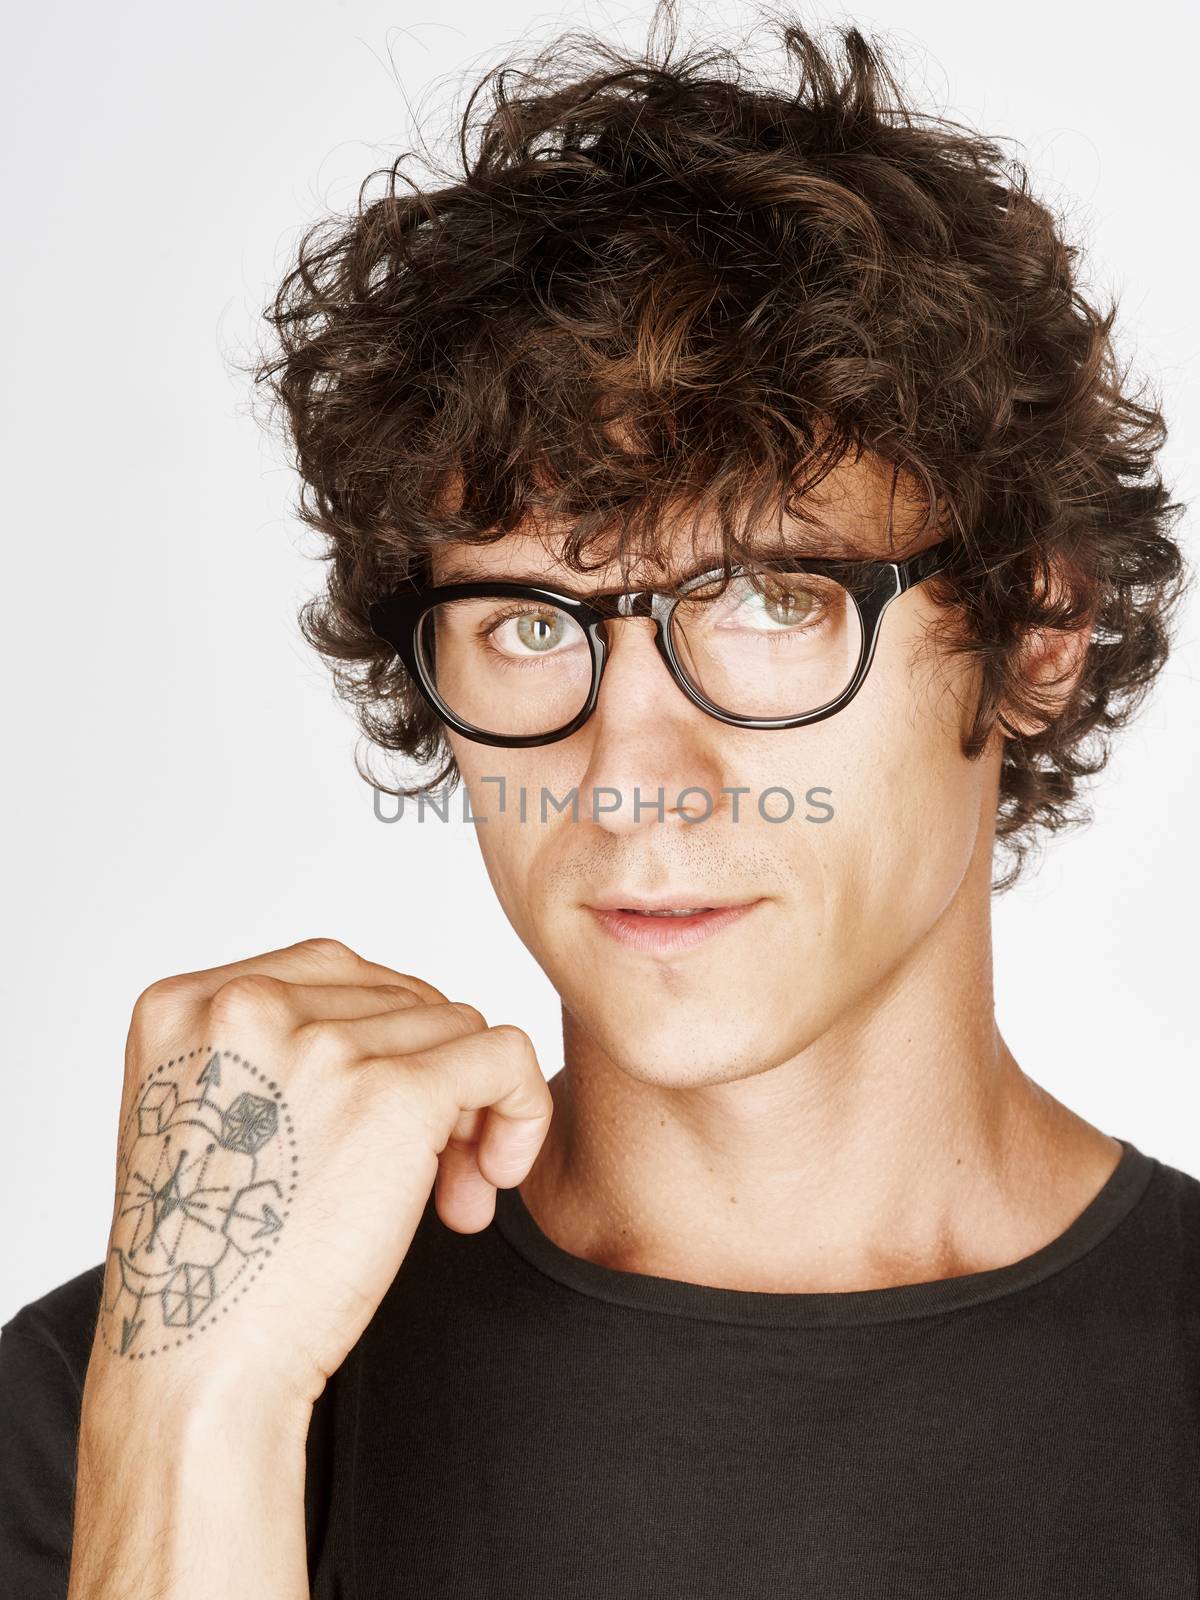 Emotional portrait of a pretty young man on white background